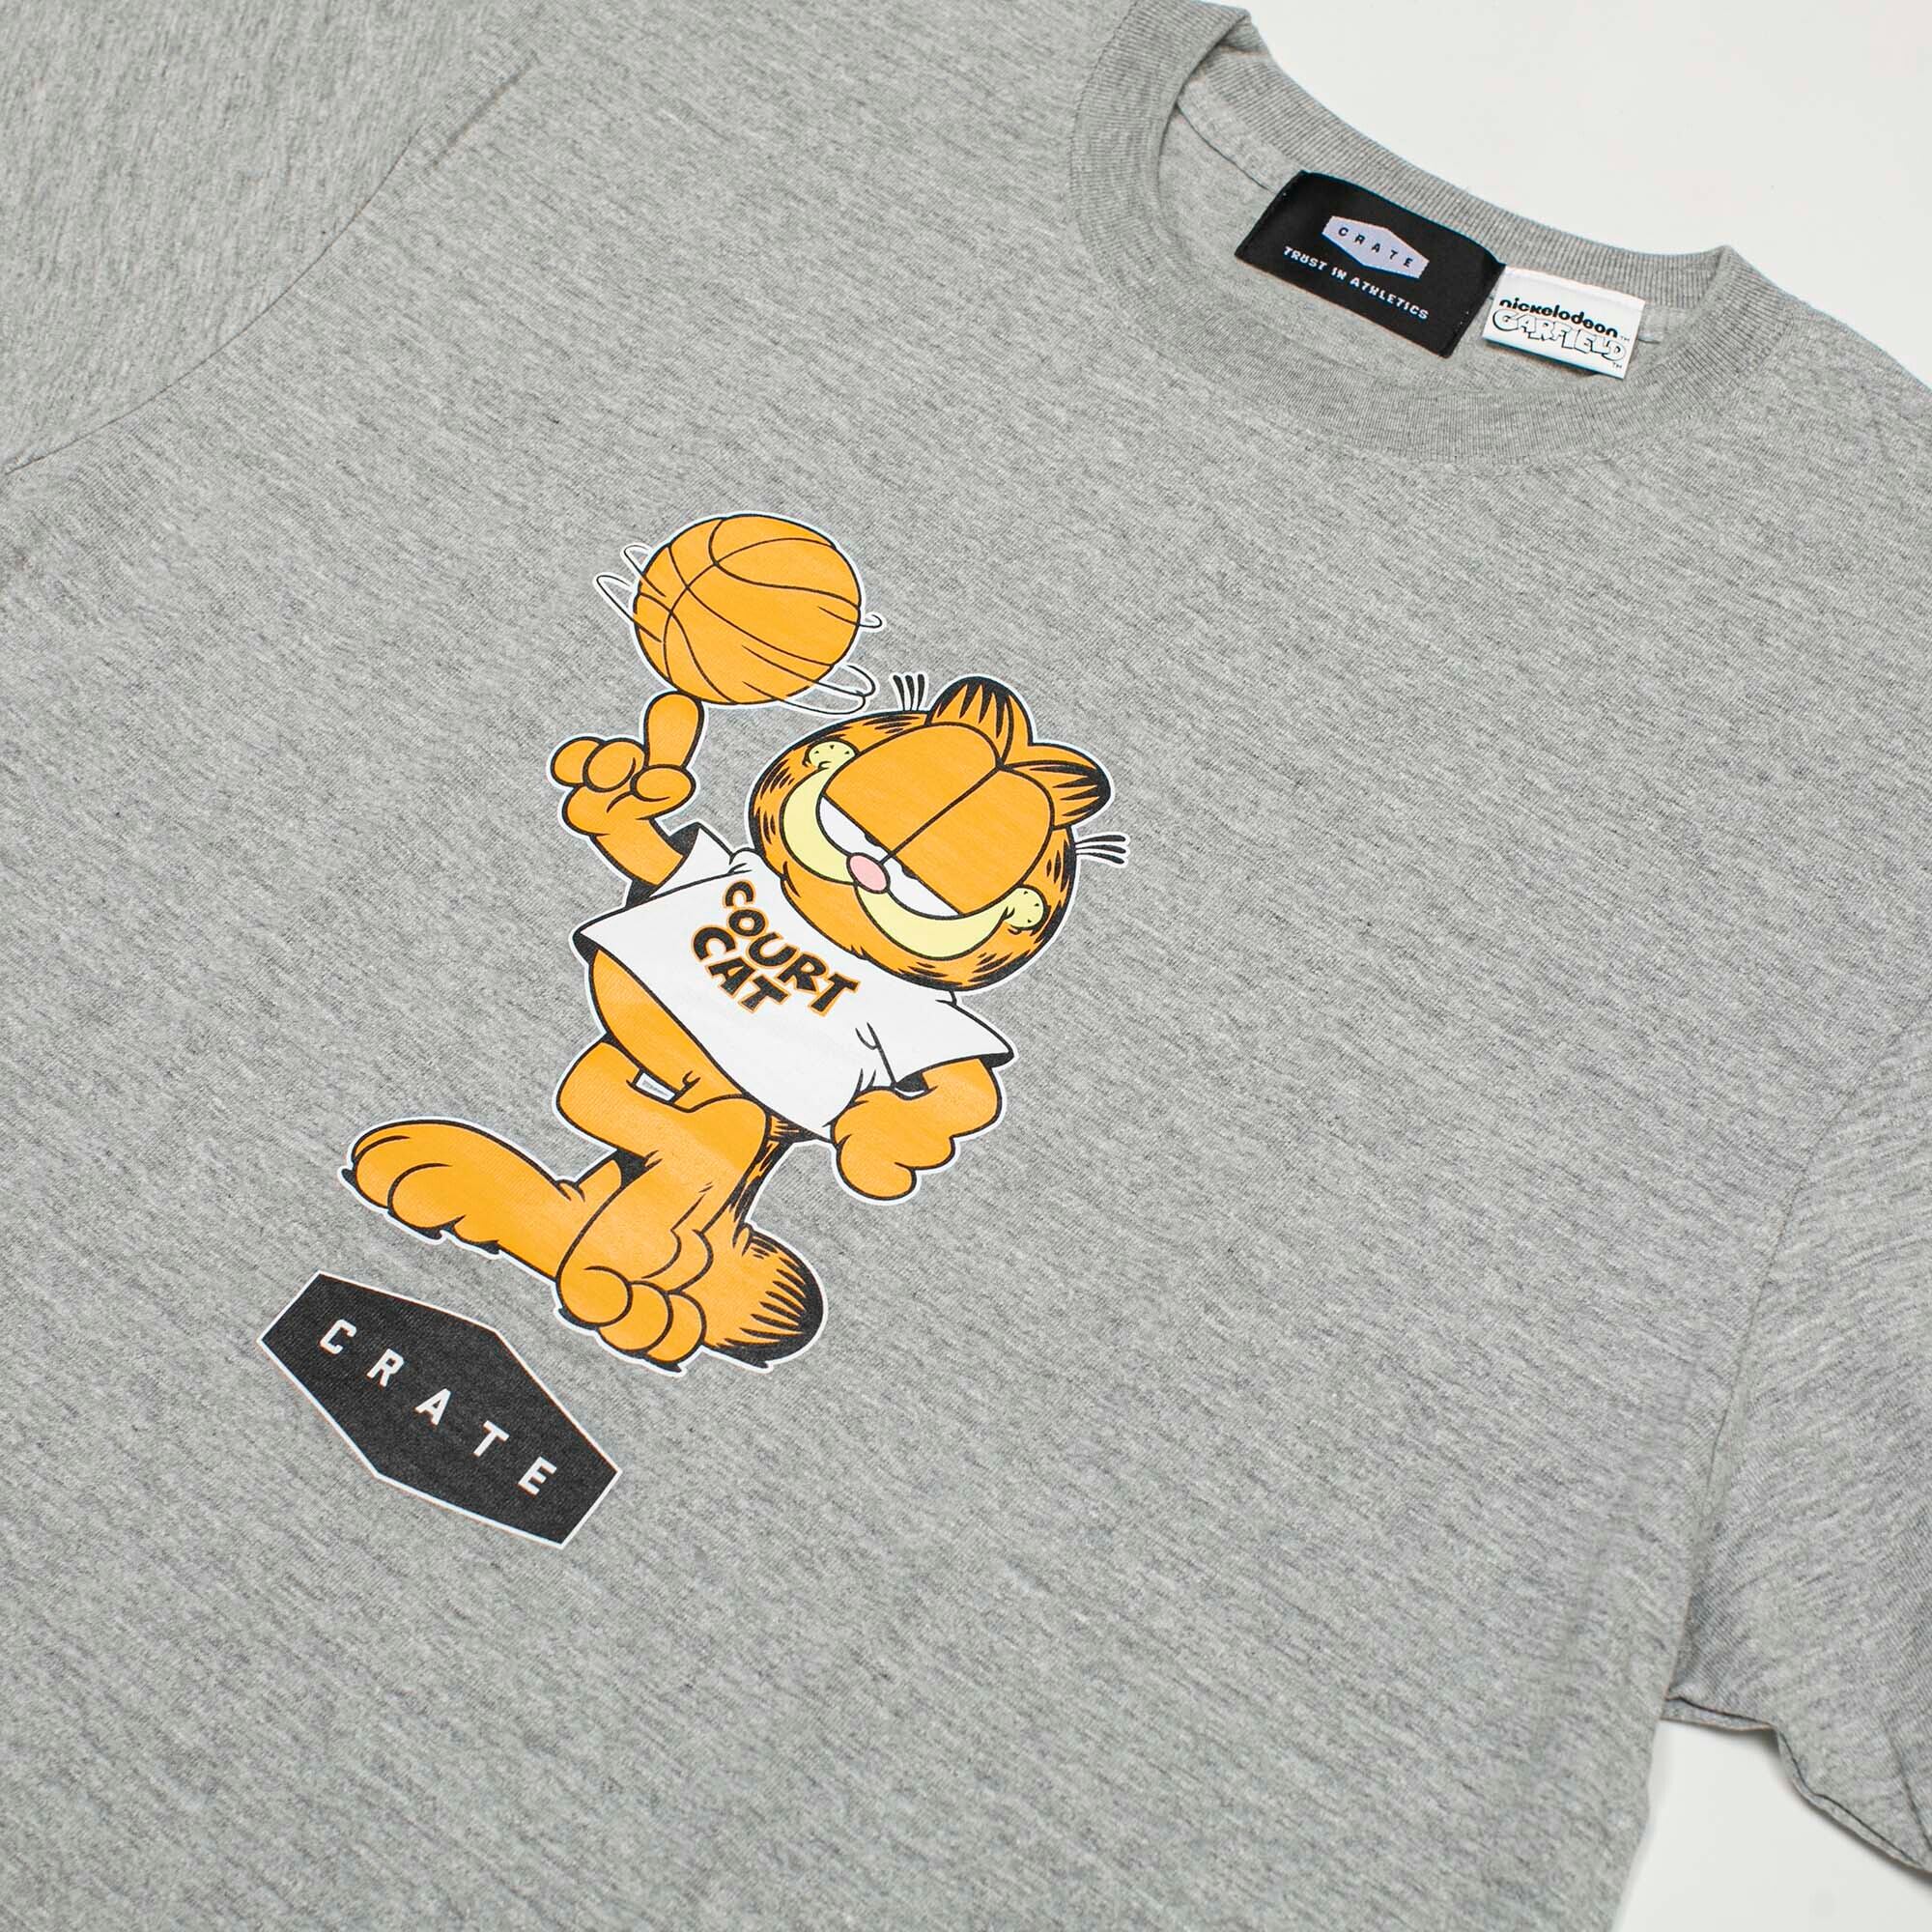 GARFIELD×CRATE COLLABORATION T-SHIRTS #1 GRAY | CRATE ATHLETICS